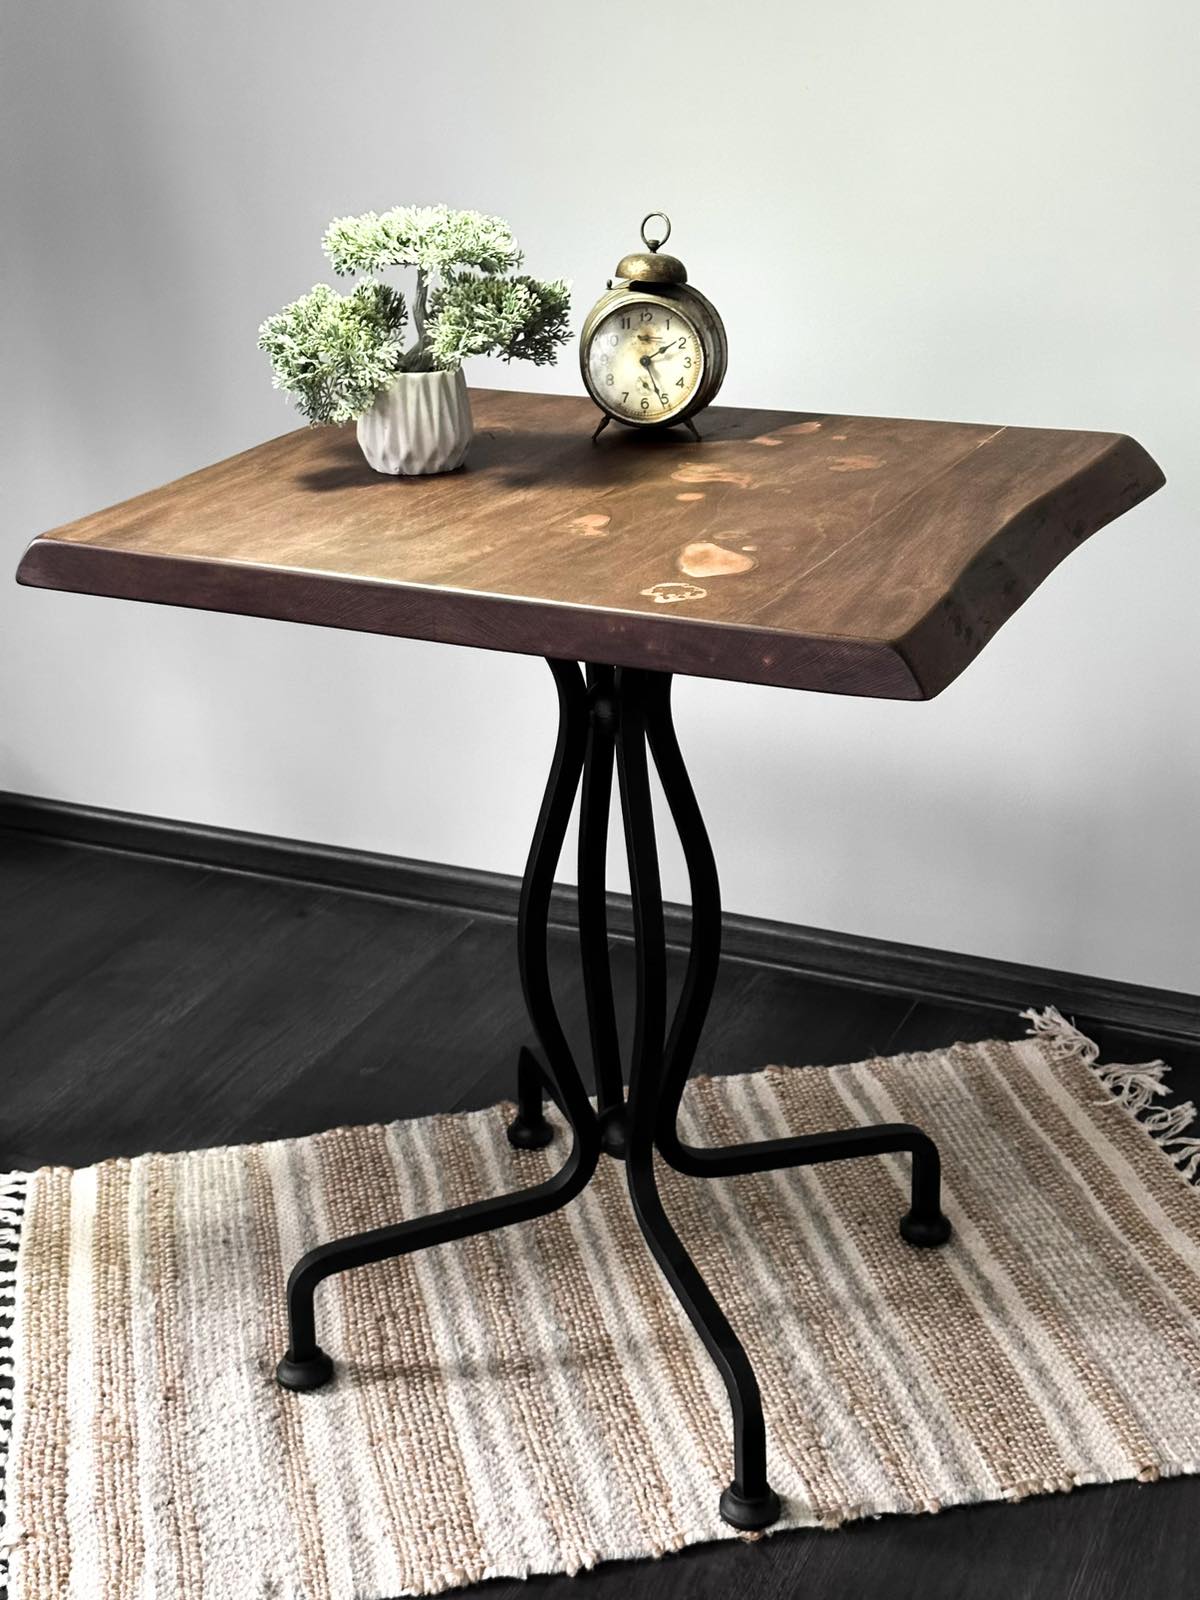 Layla`s Table - one out of one